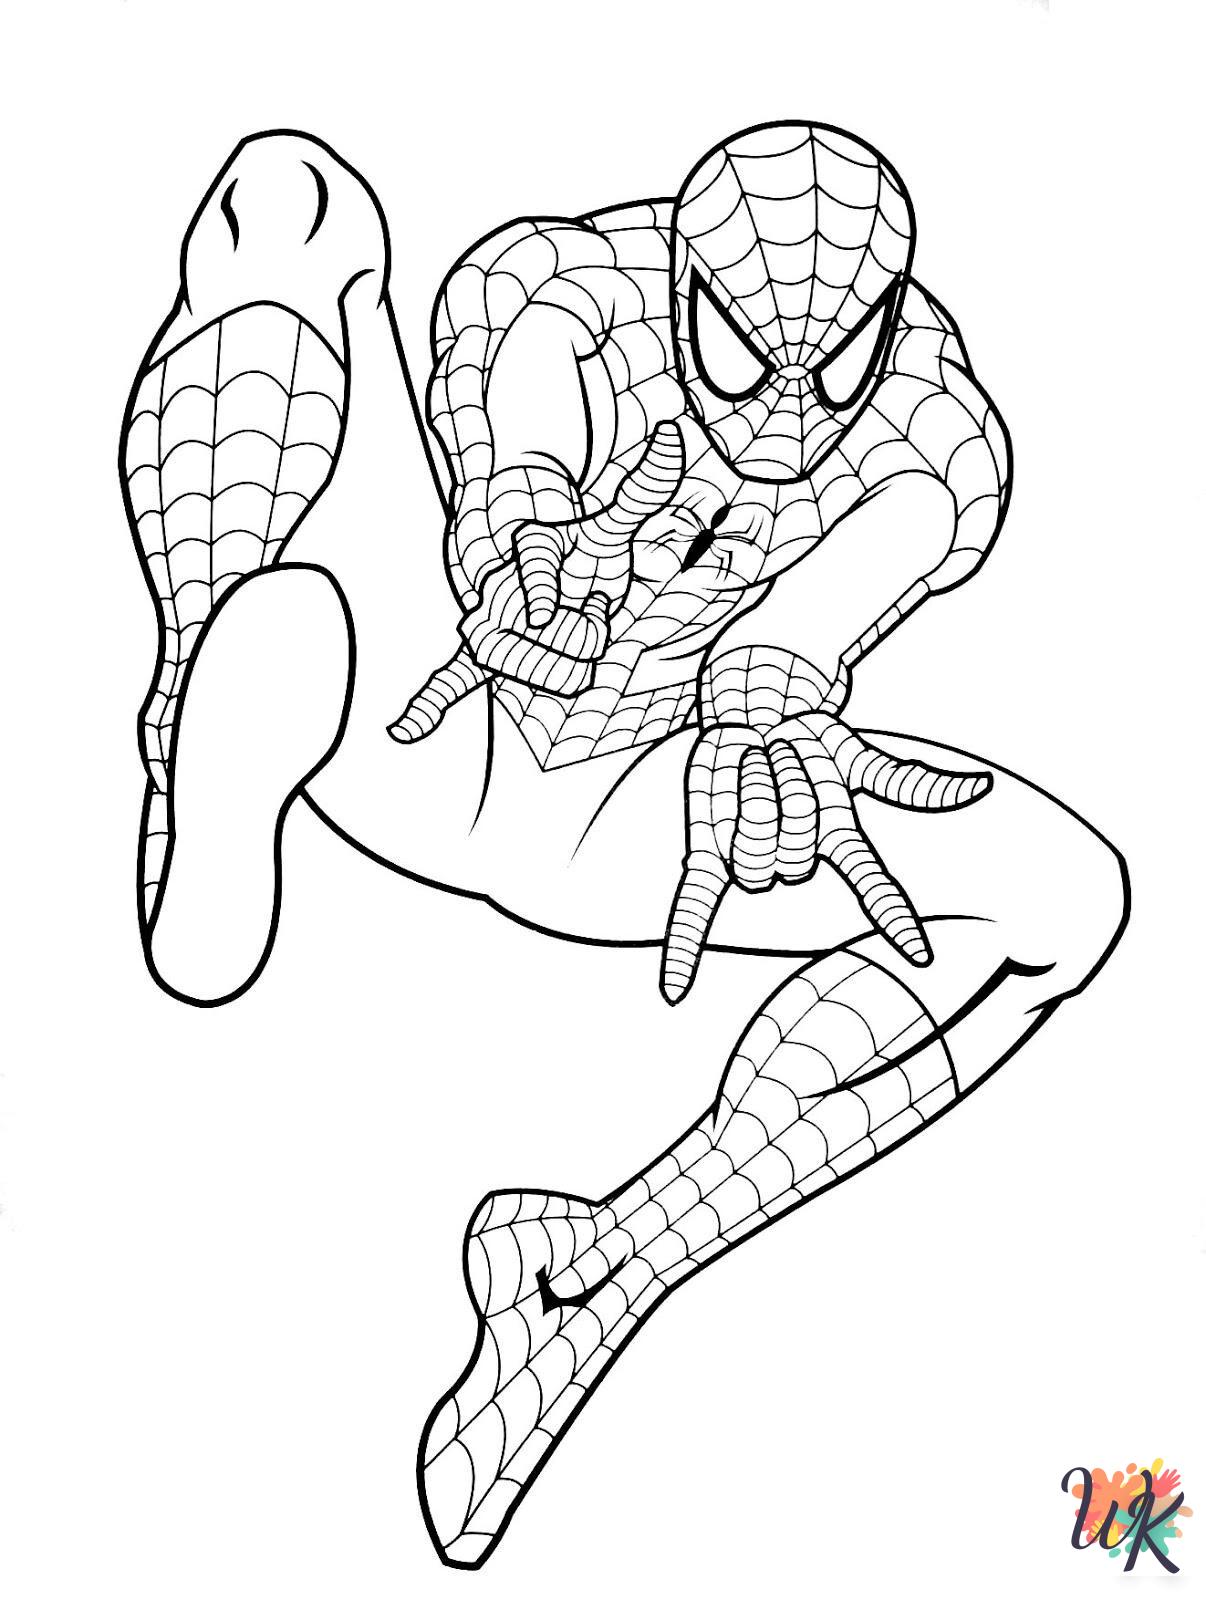 Superhero coloring pages printable